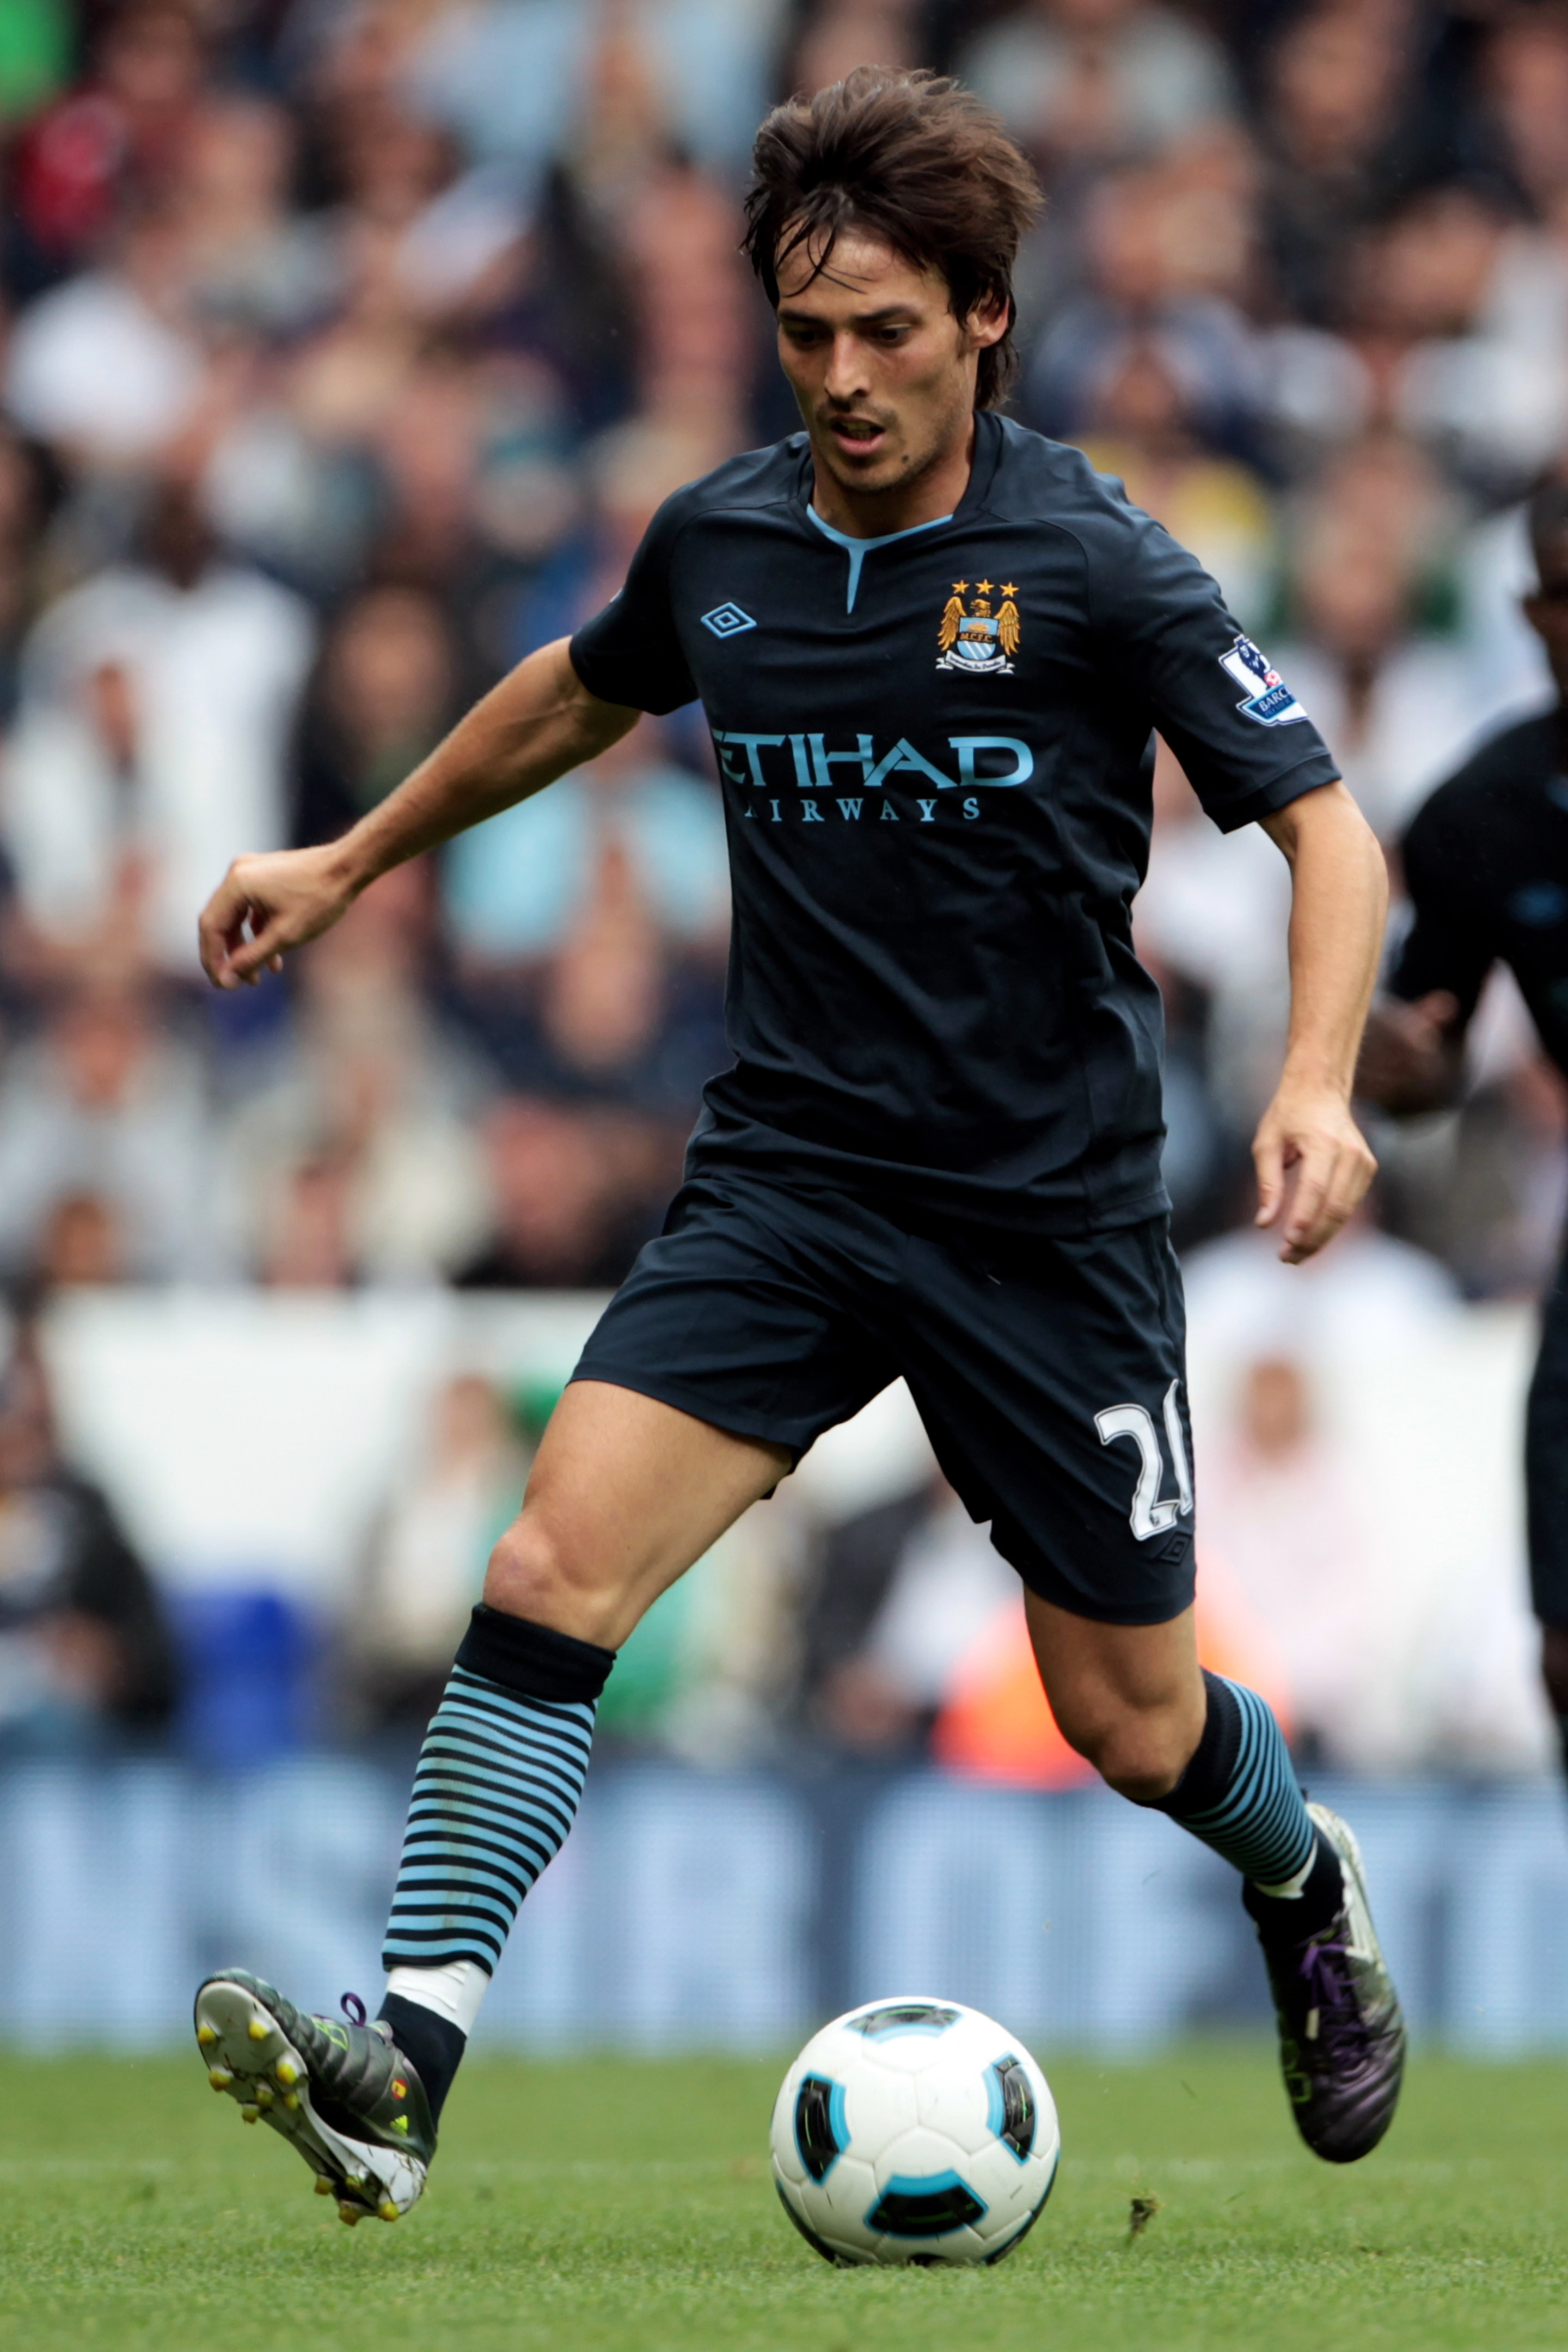 LONDON, ENGLAND - AUGUST 14:  David Silva of Manchester City in action during the Barclays Premier League match between Tottenham Hotspur and Manchester City at White Hart Lane on August 14, 2010 in London, England.  (Photo by Phil Cole/Getty Images)